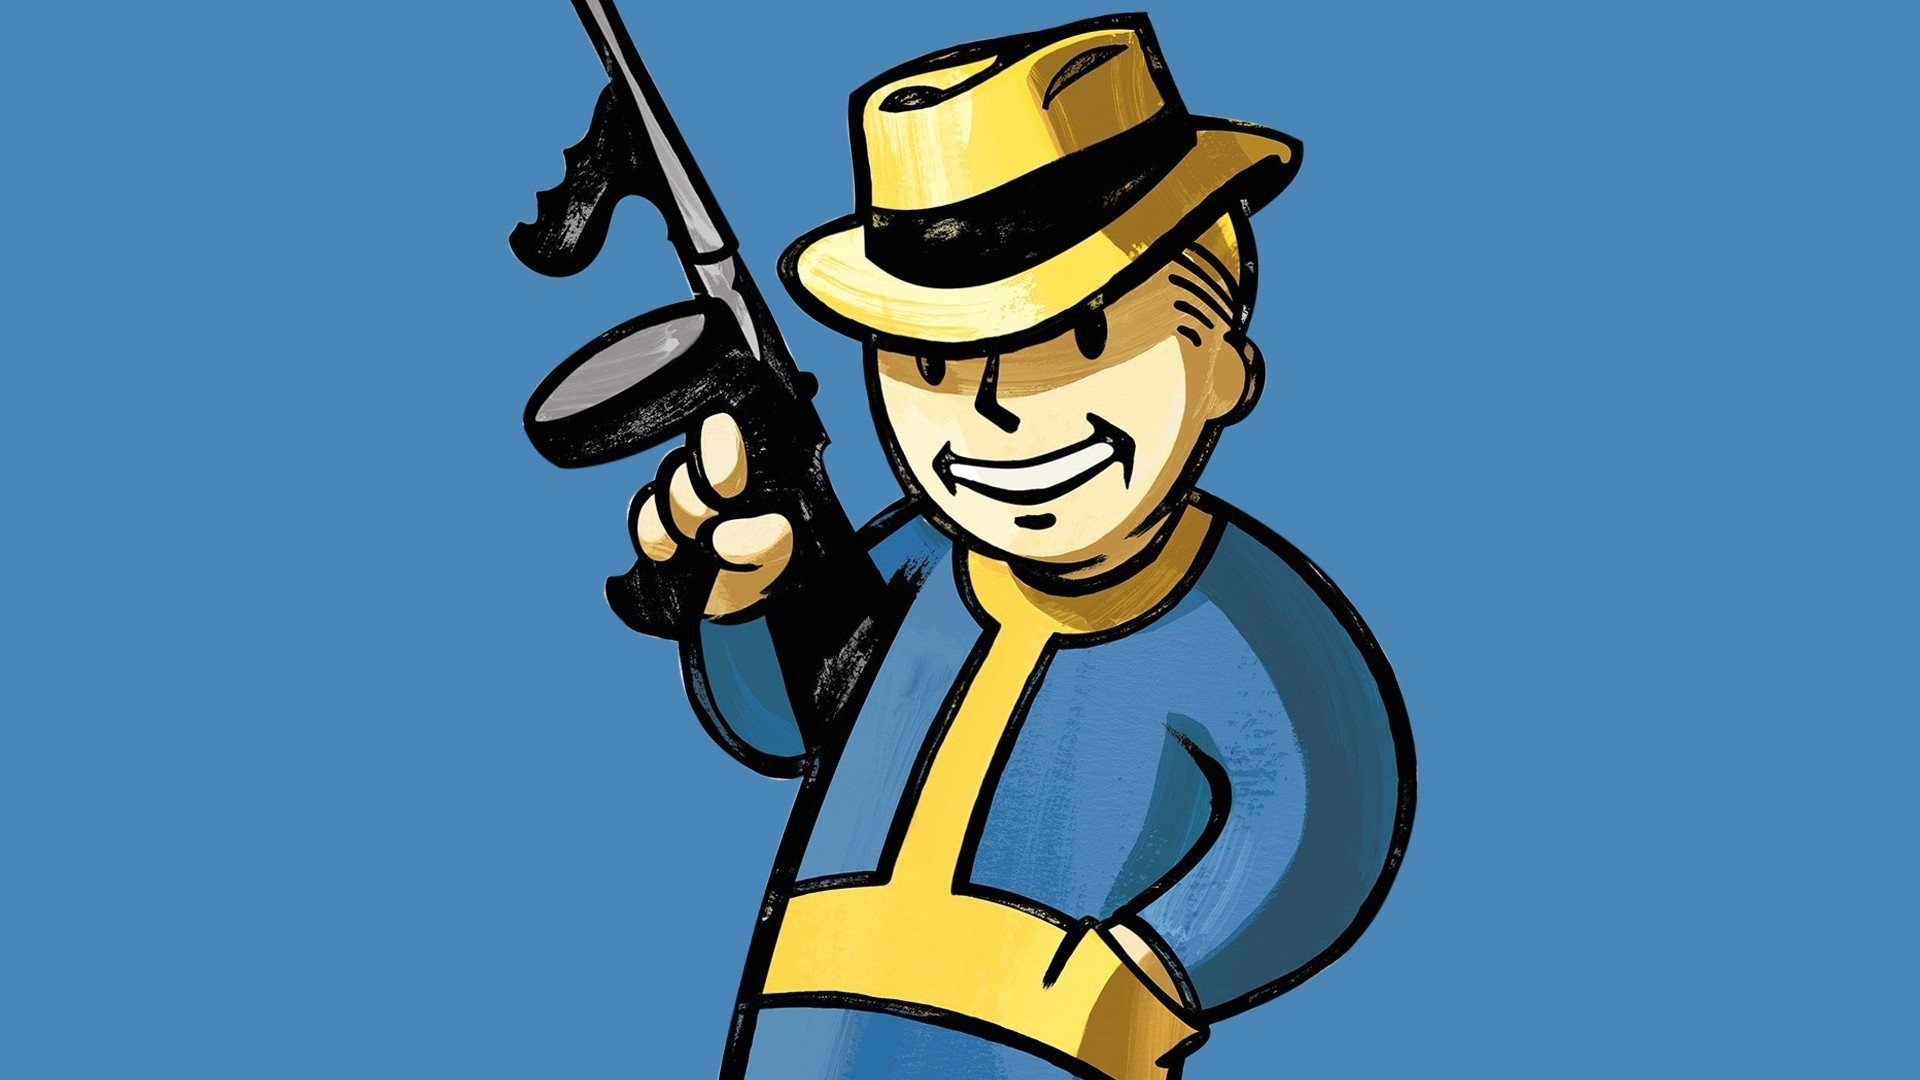 1920x1080 Video games minimalistic Fallout Bethesda Softworks pip boy role playing  game wallpaper |  | 240582 | WallpaperUP